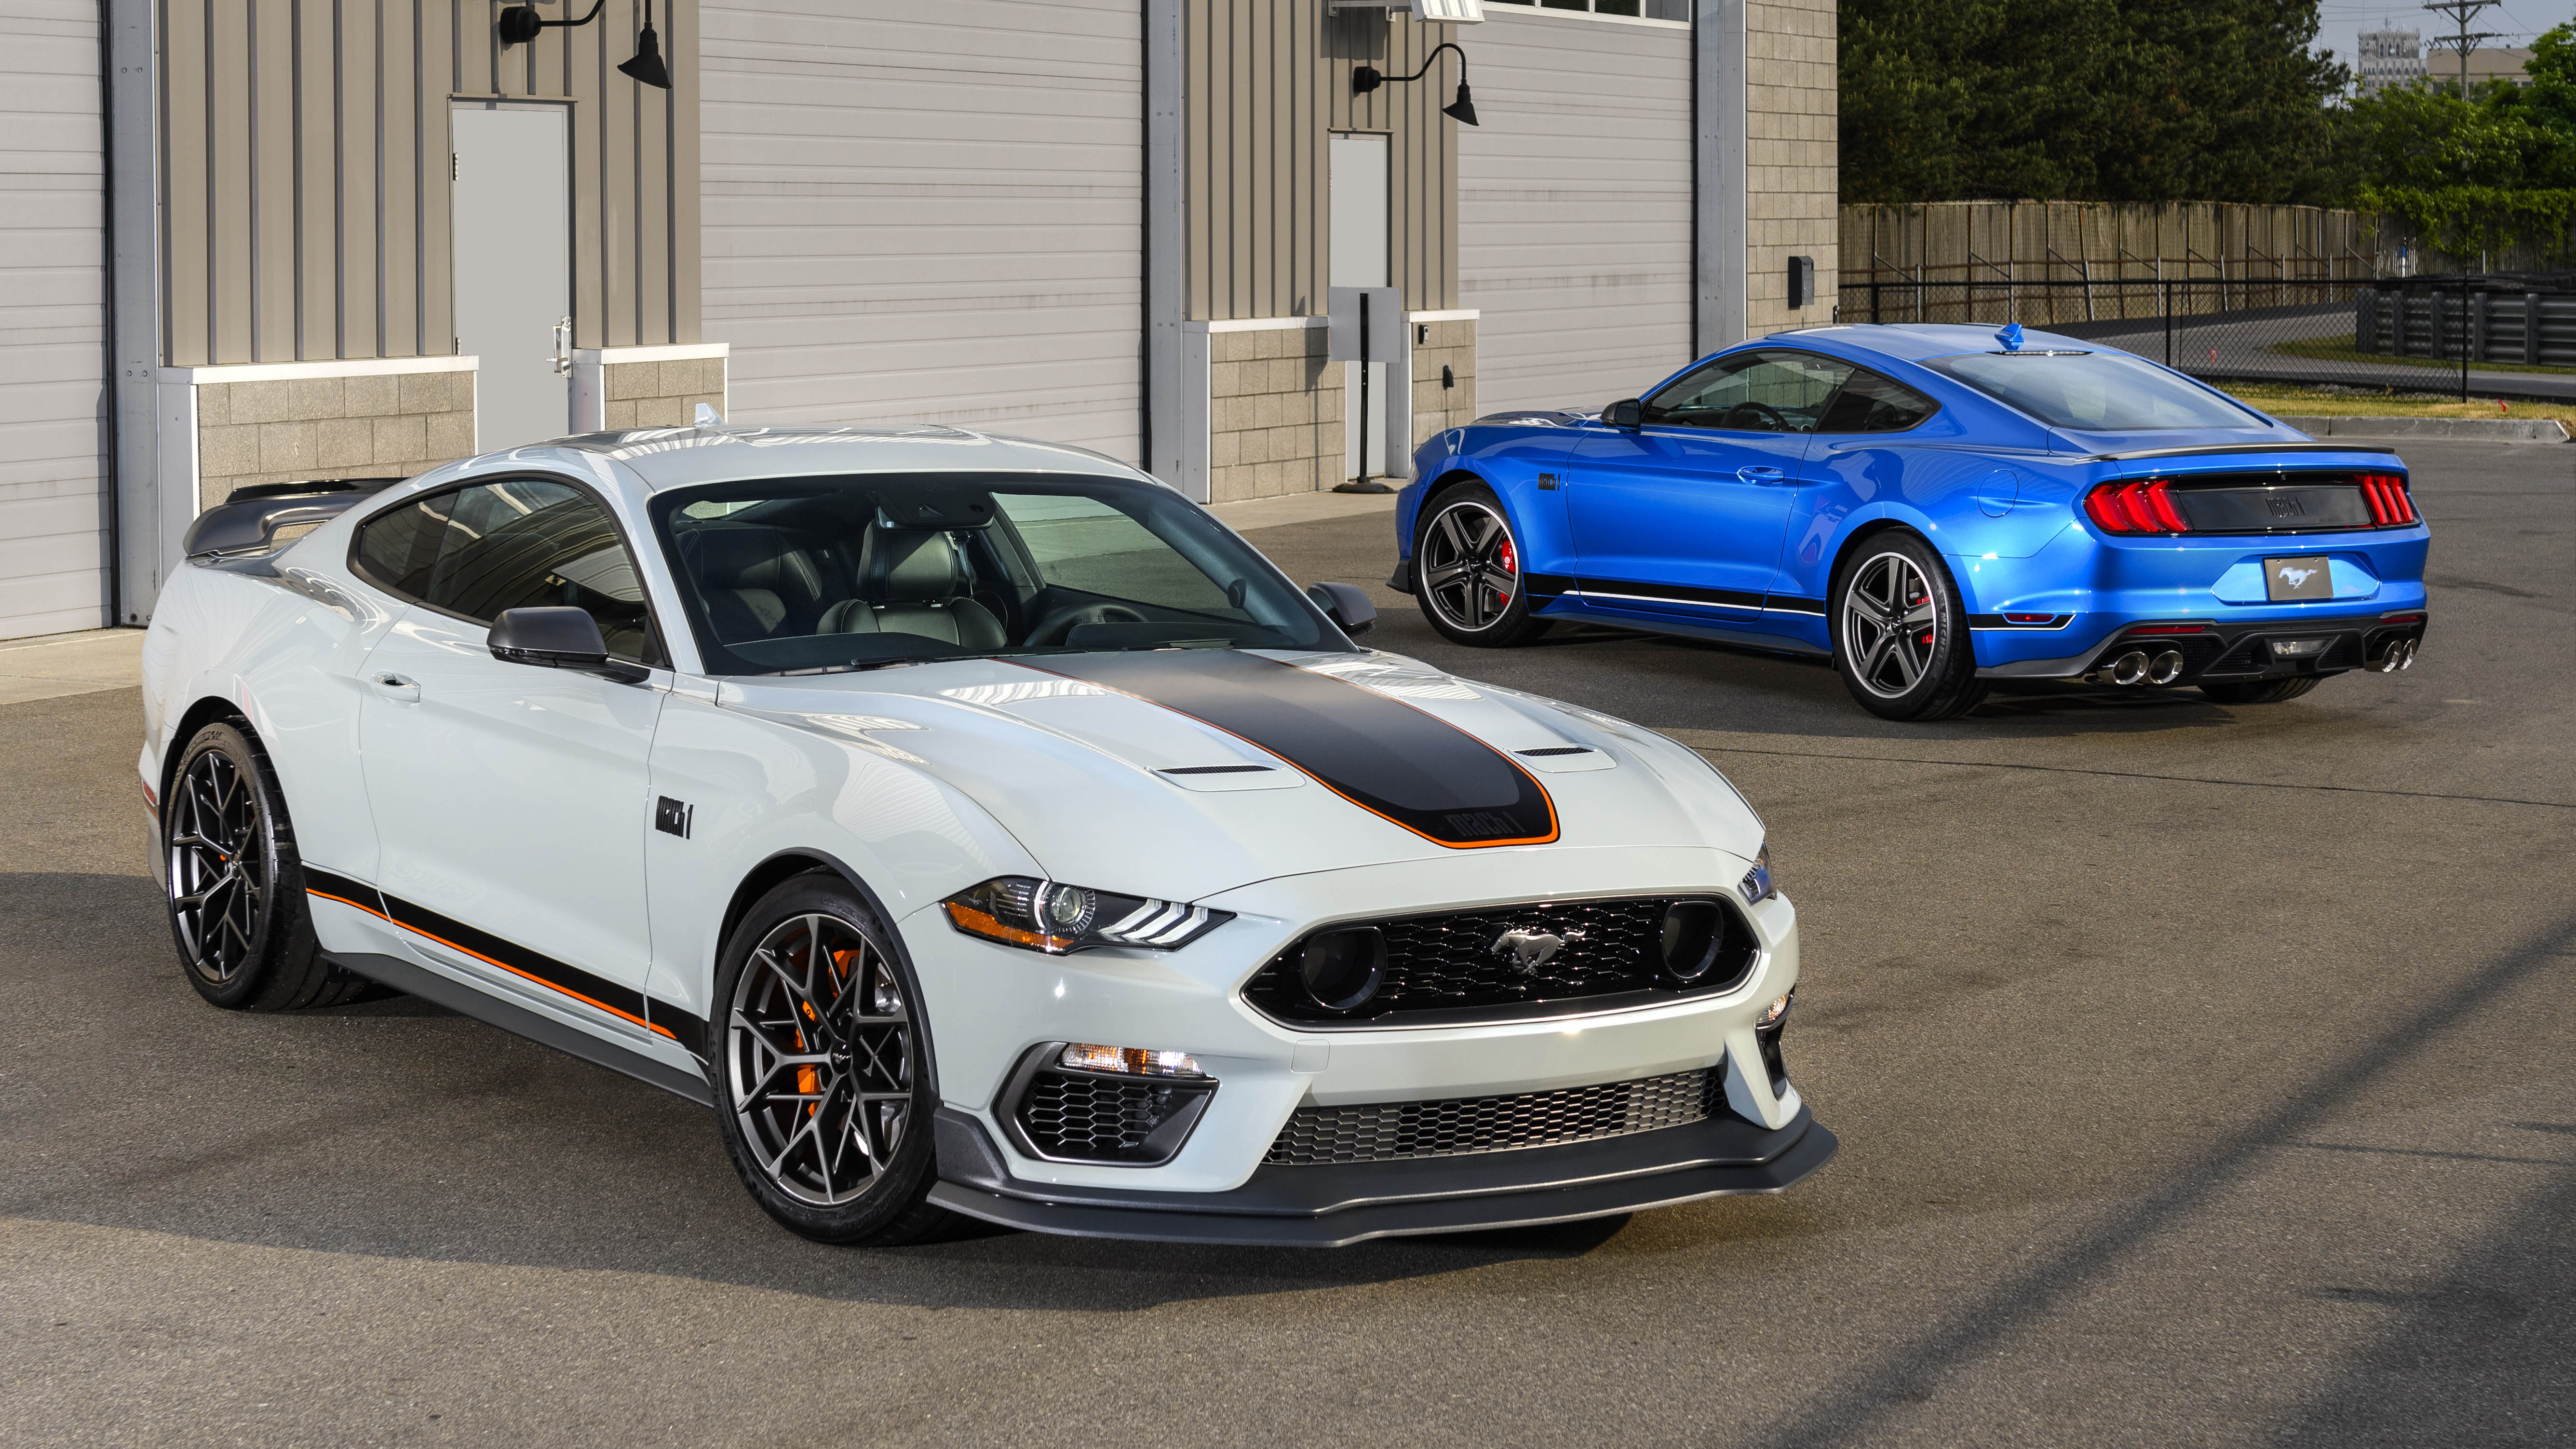 2021 Ford Mustang Mach 1 Revealed With Lots Of Shelby Derived